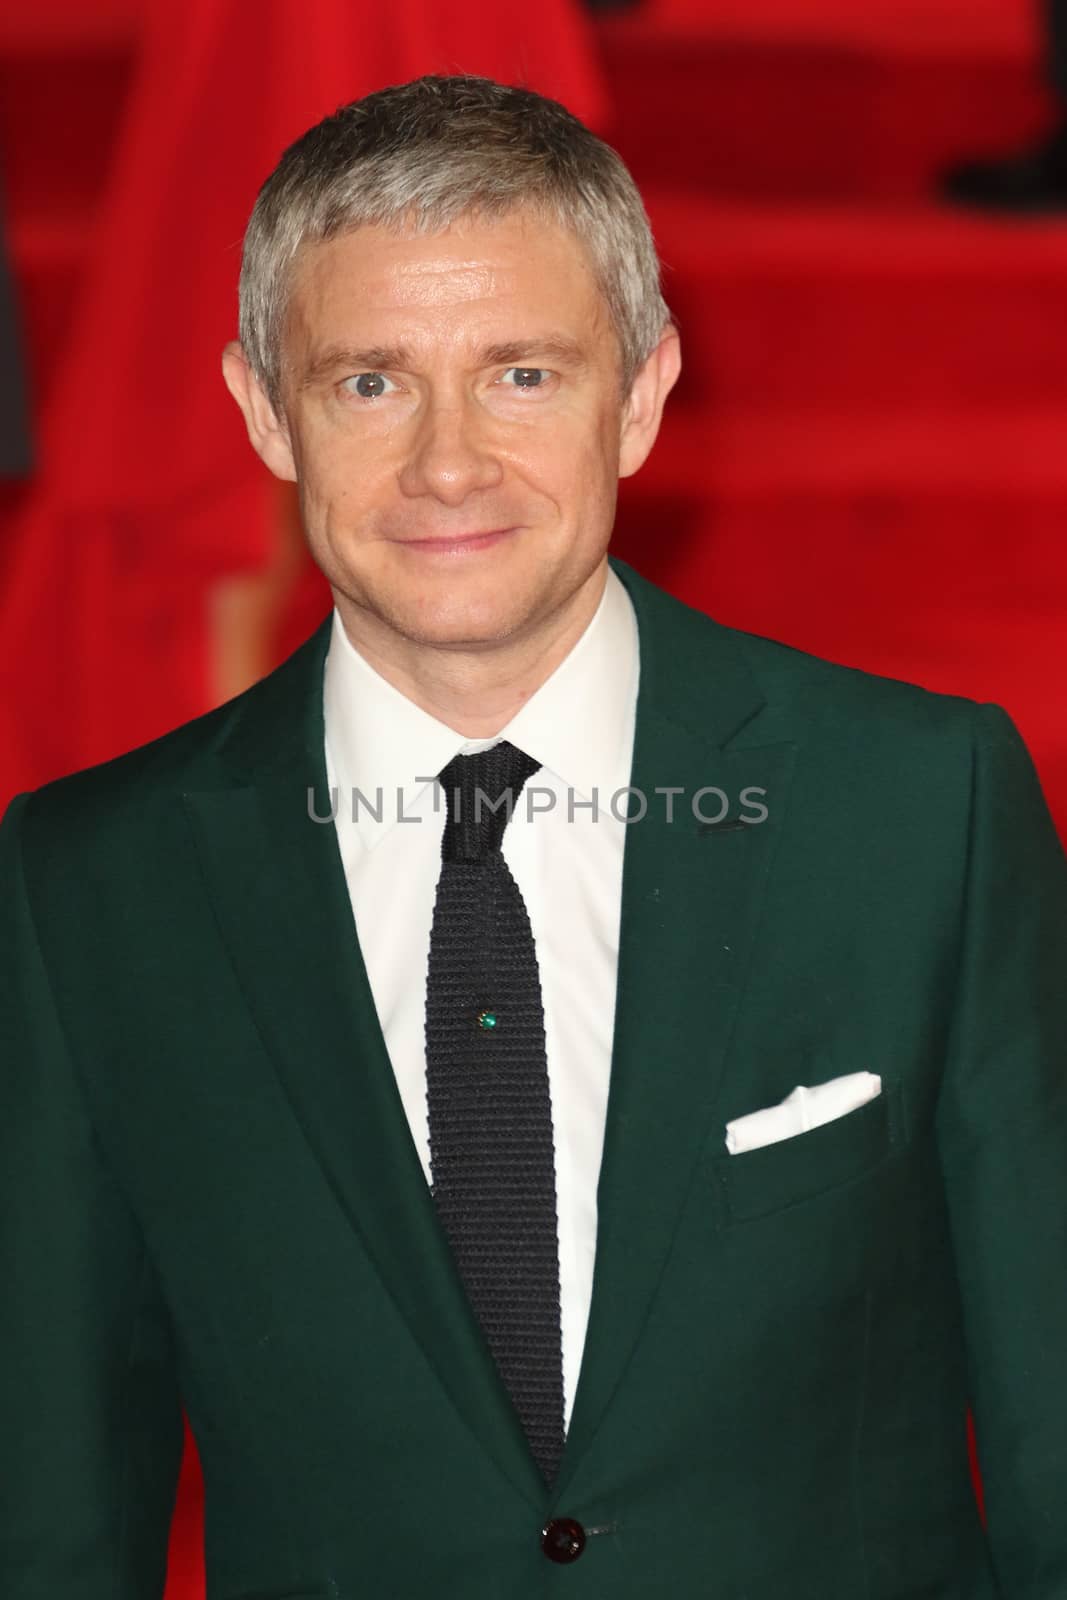 UNITED KINGDOM, London: Martin Freeman attends the world premiere of the latest Bond film, Spectre, at Royal Albert Hall in London on October 26, 2015.